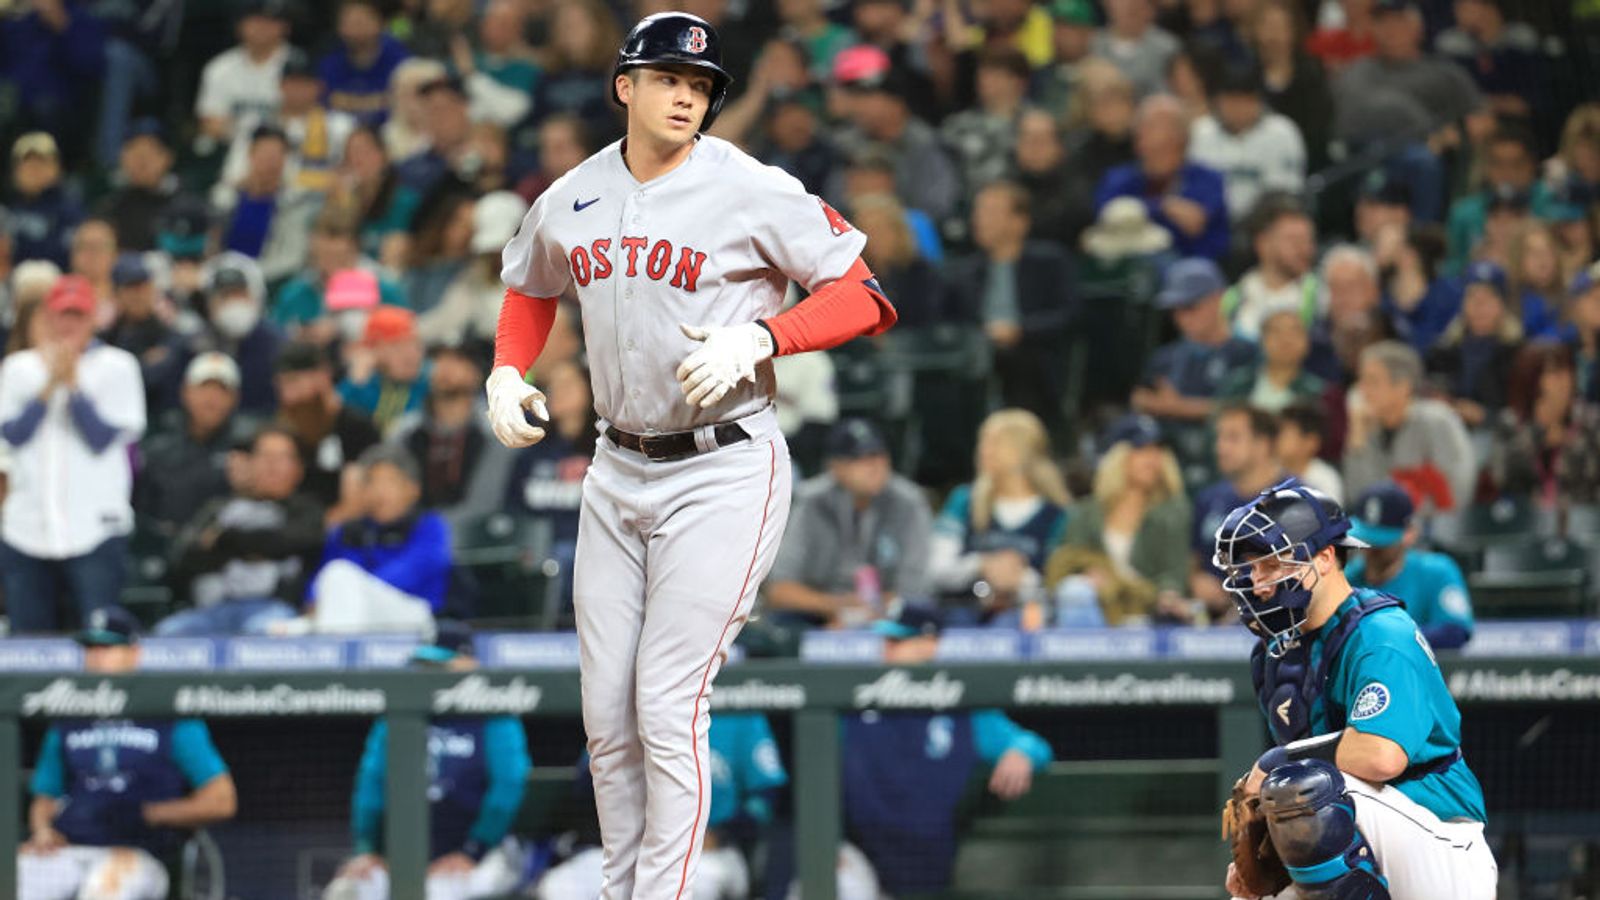 Bobby Dalbec deserves fair bid at first base for the Red Sox